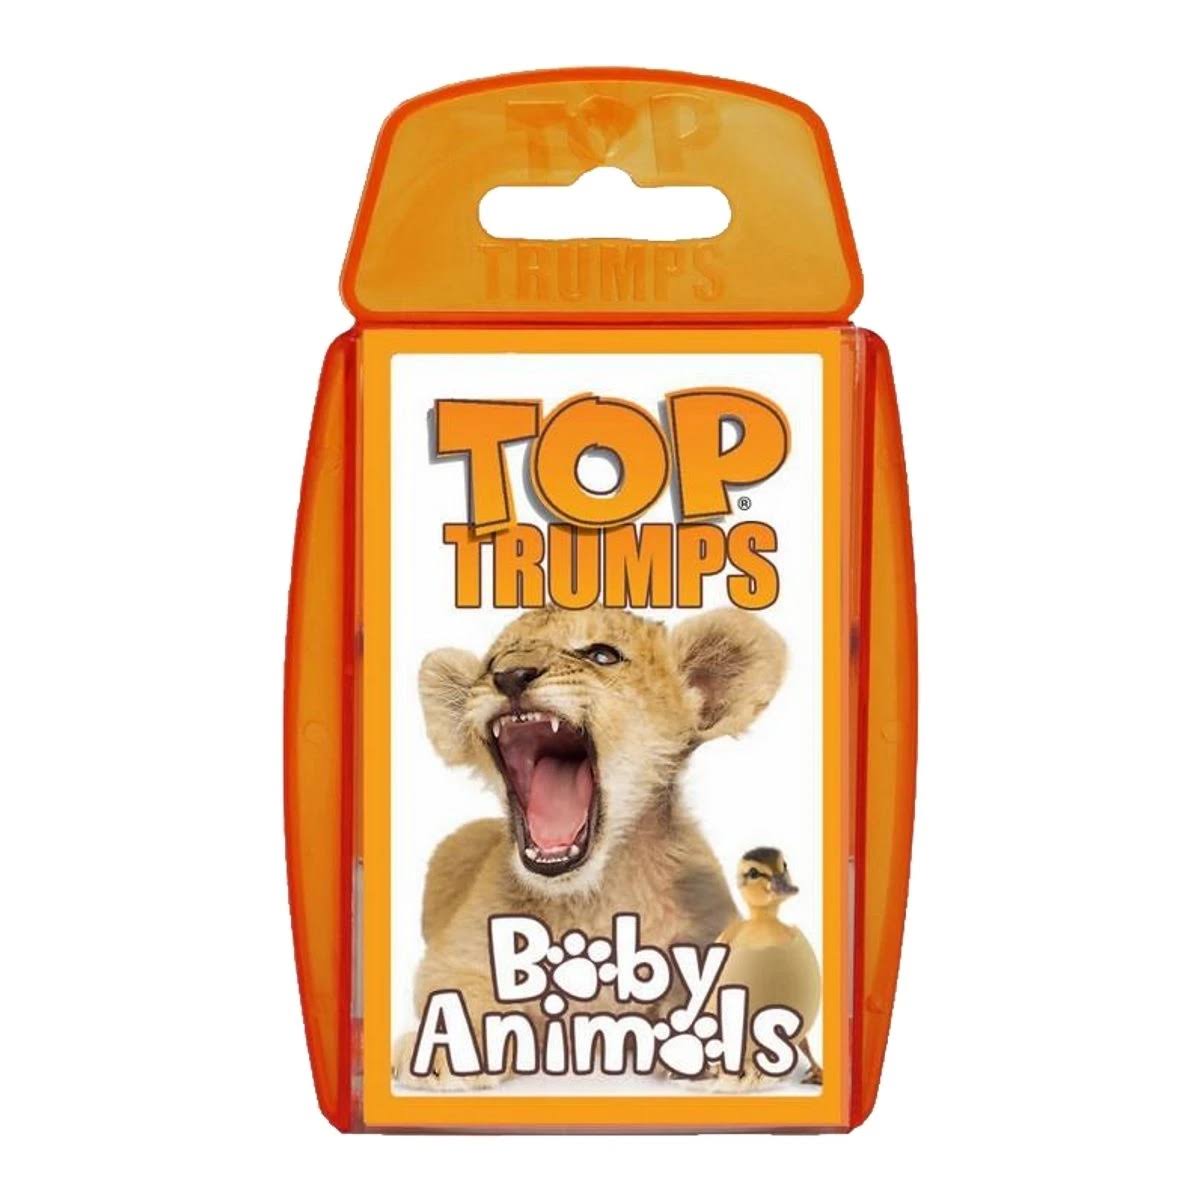 Top Trumps Baby Animals Card Game